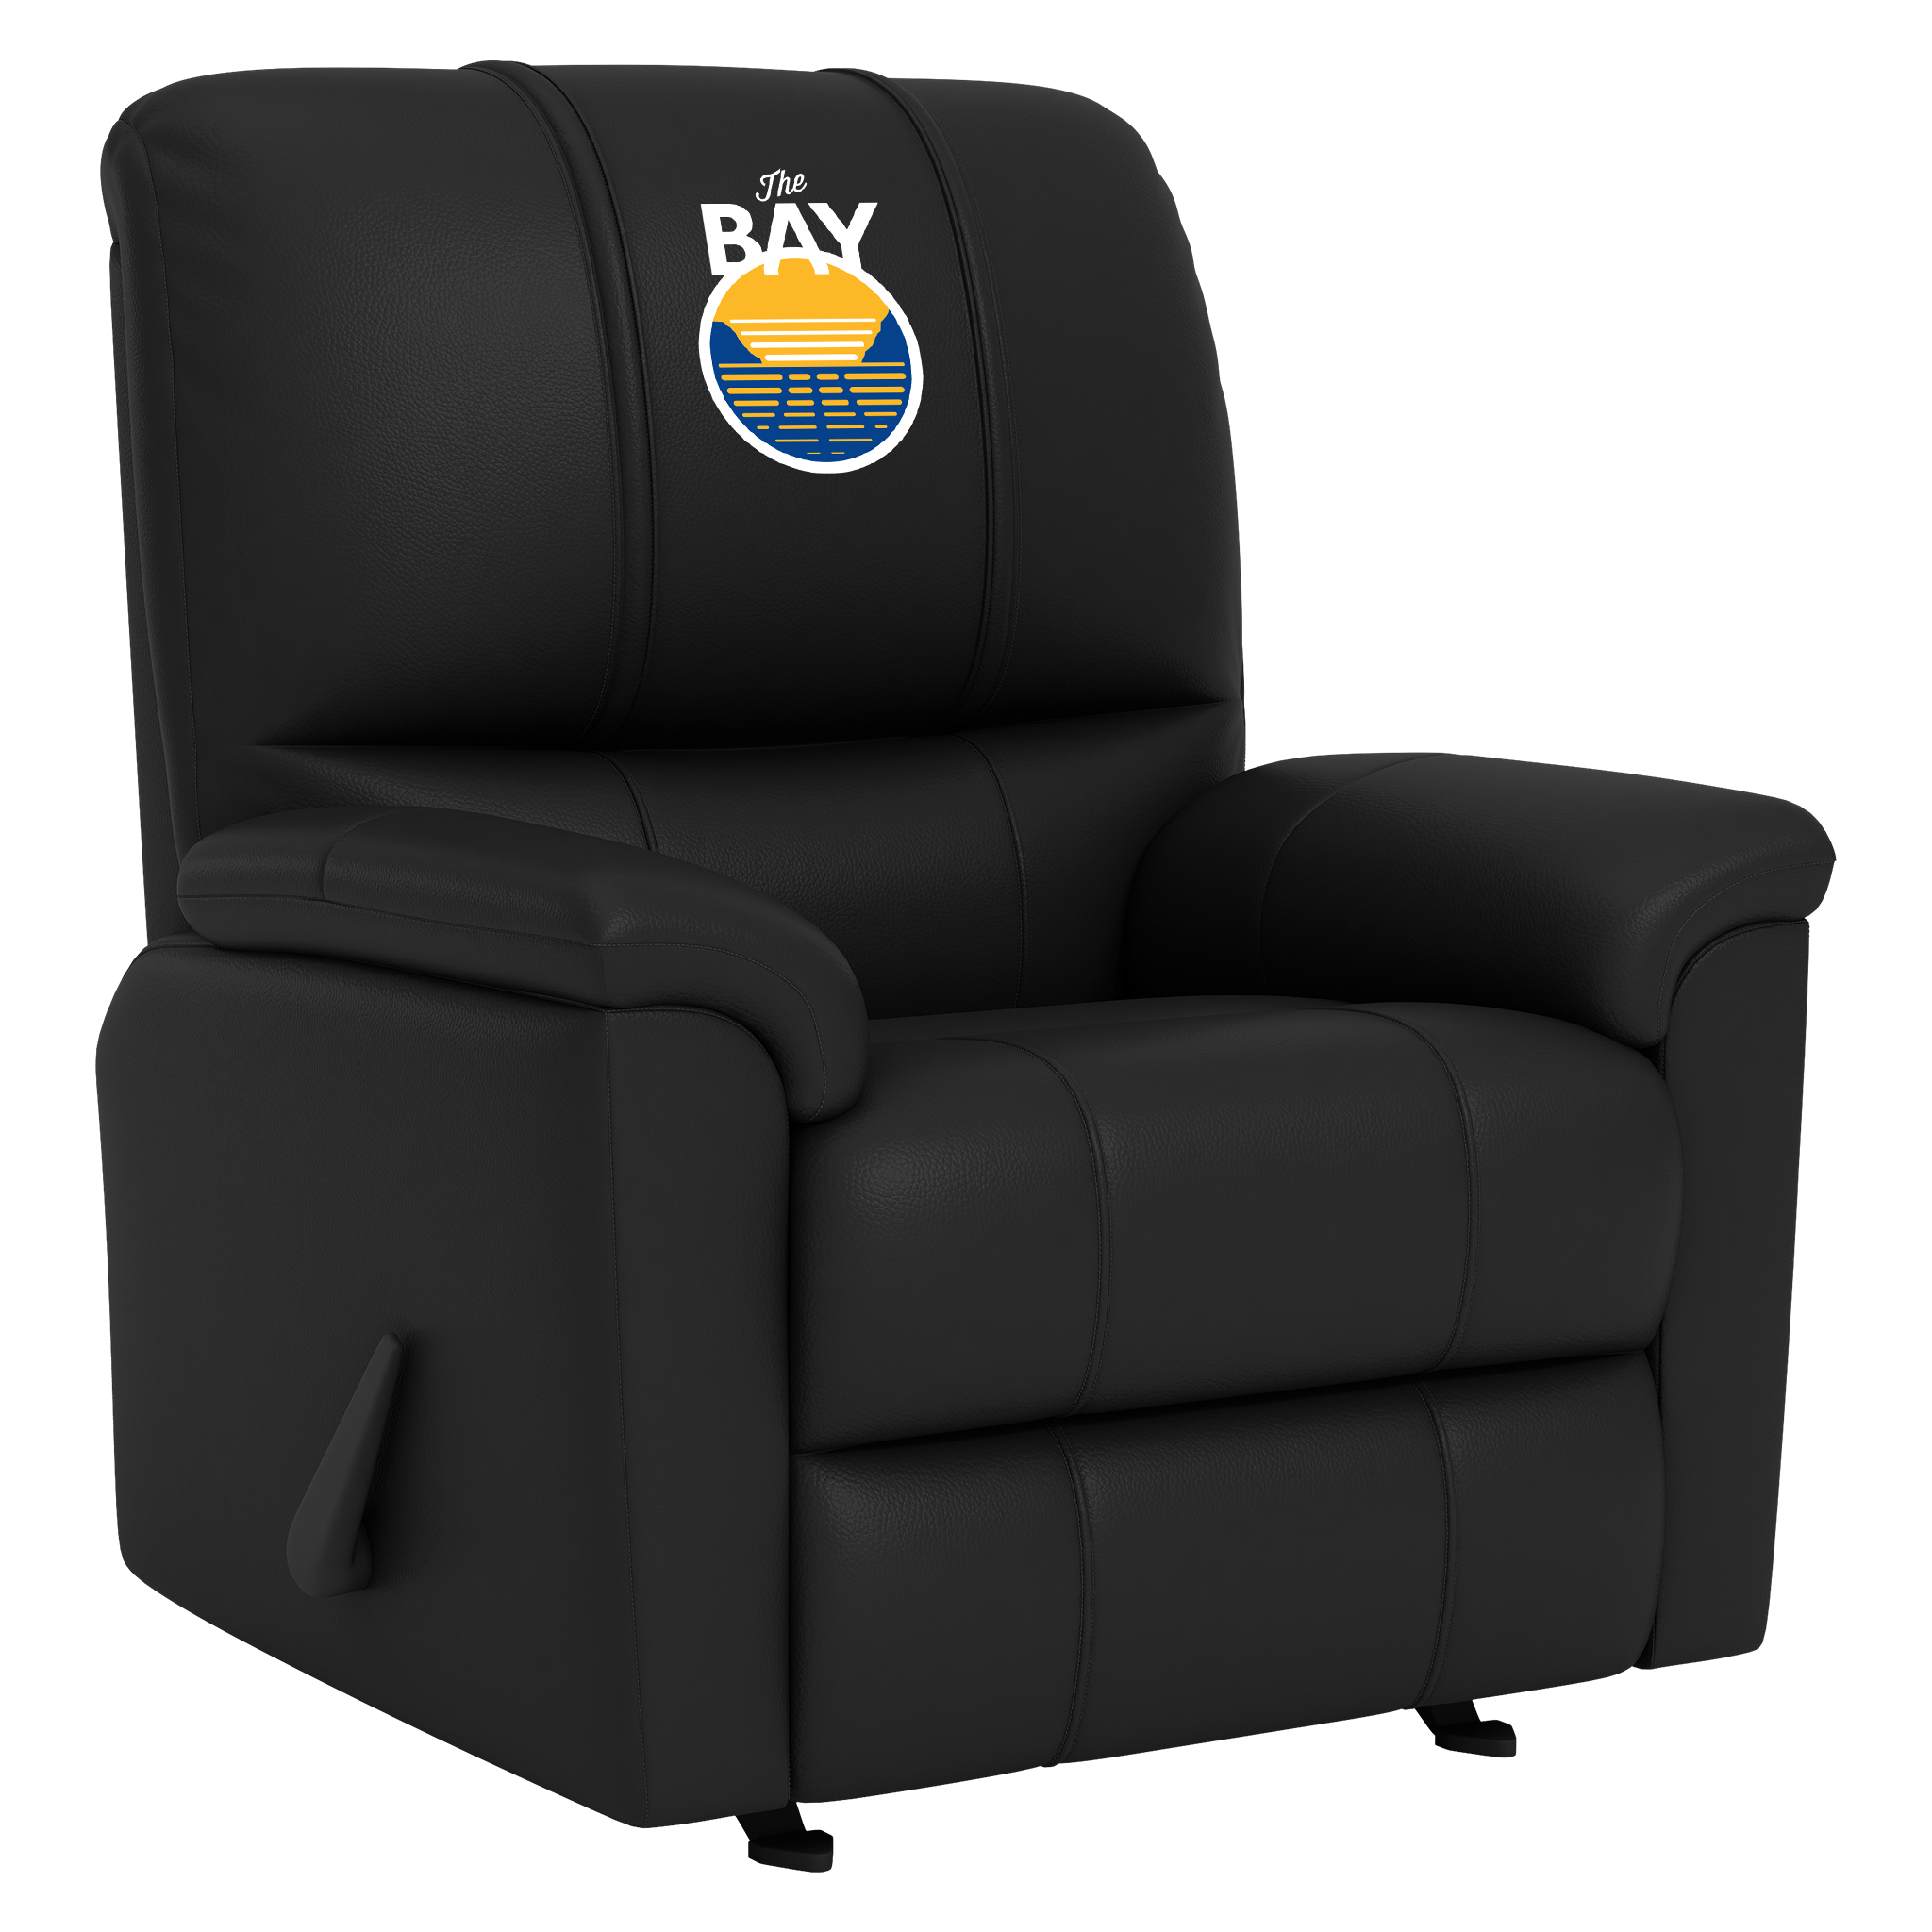 Cleveland Cavaliers Silver Club Chair with Cleveland Cavaliers Primary